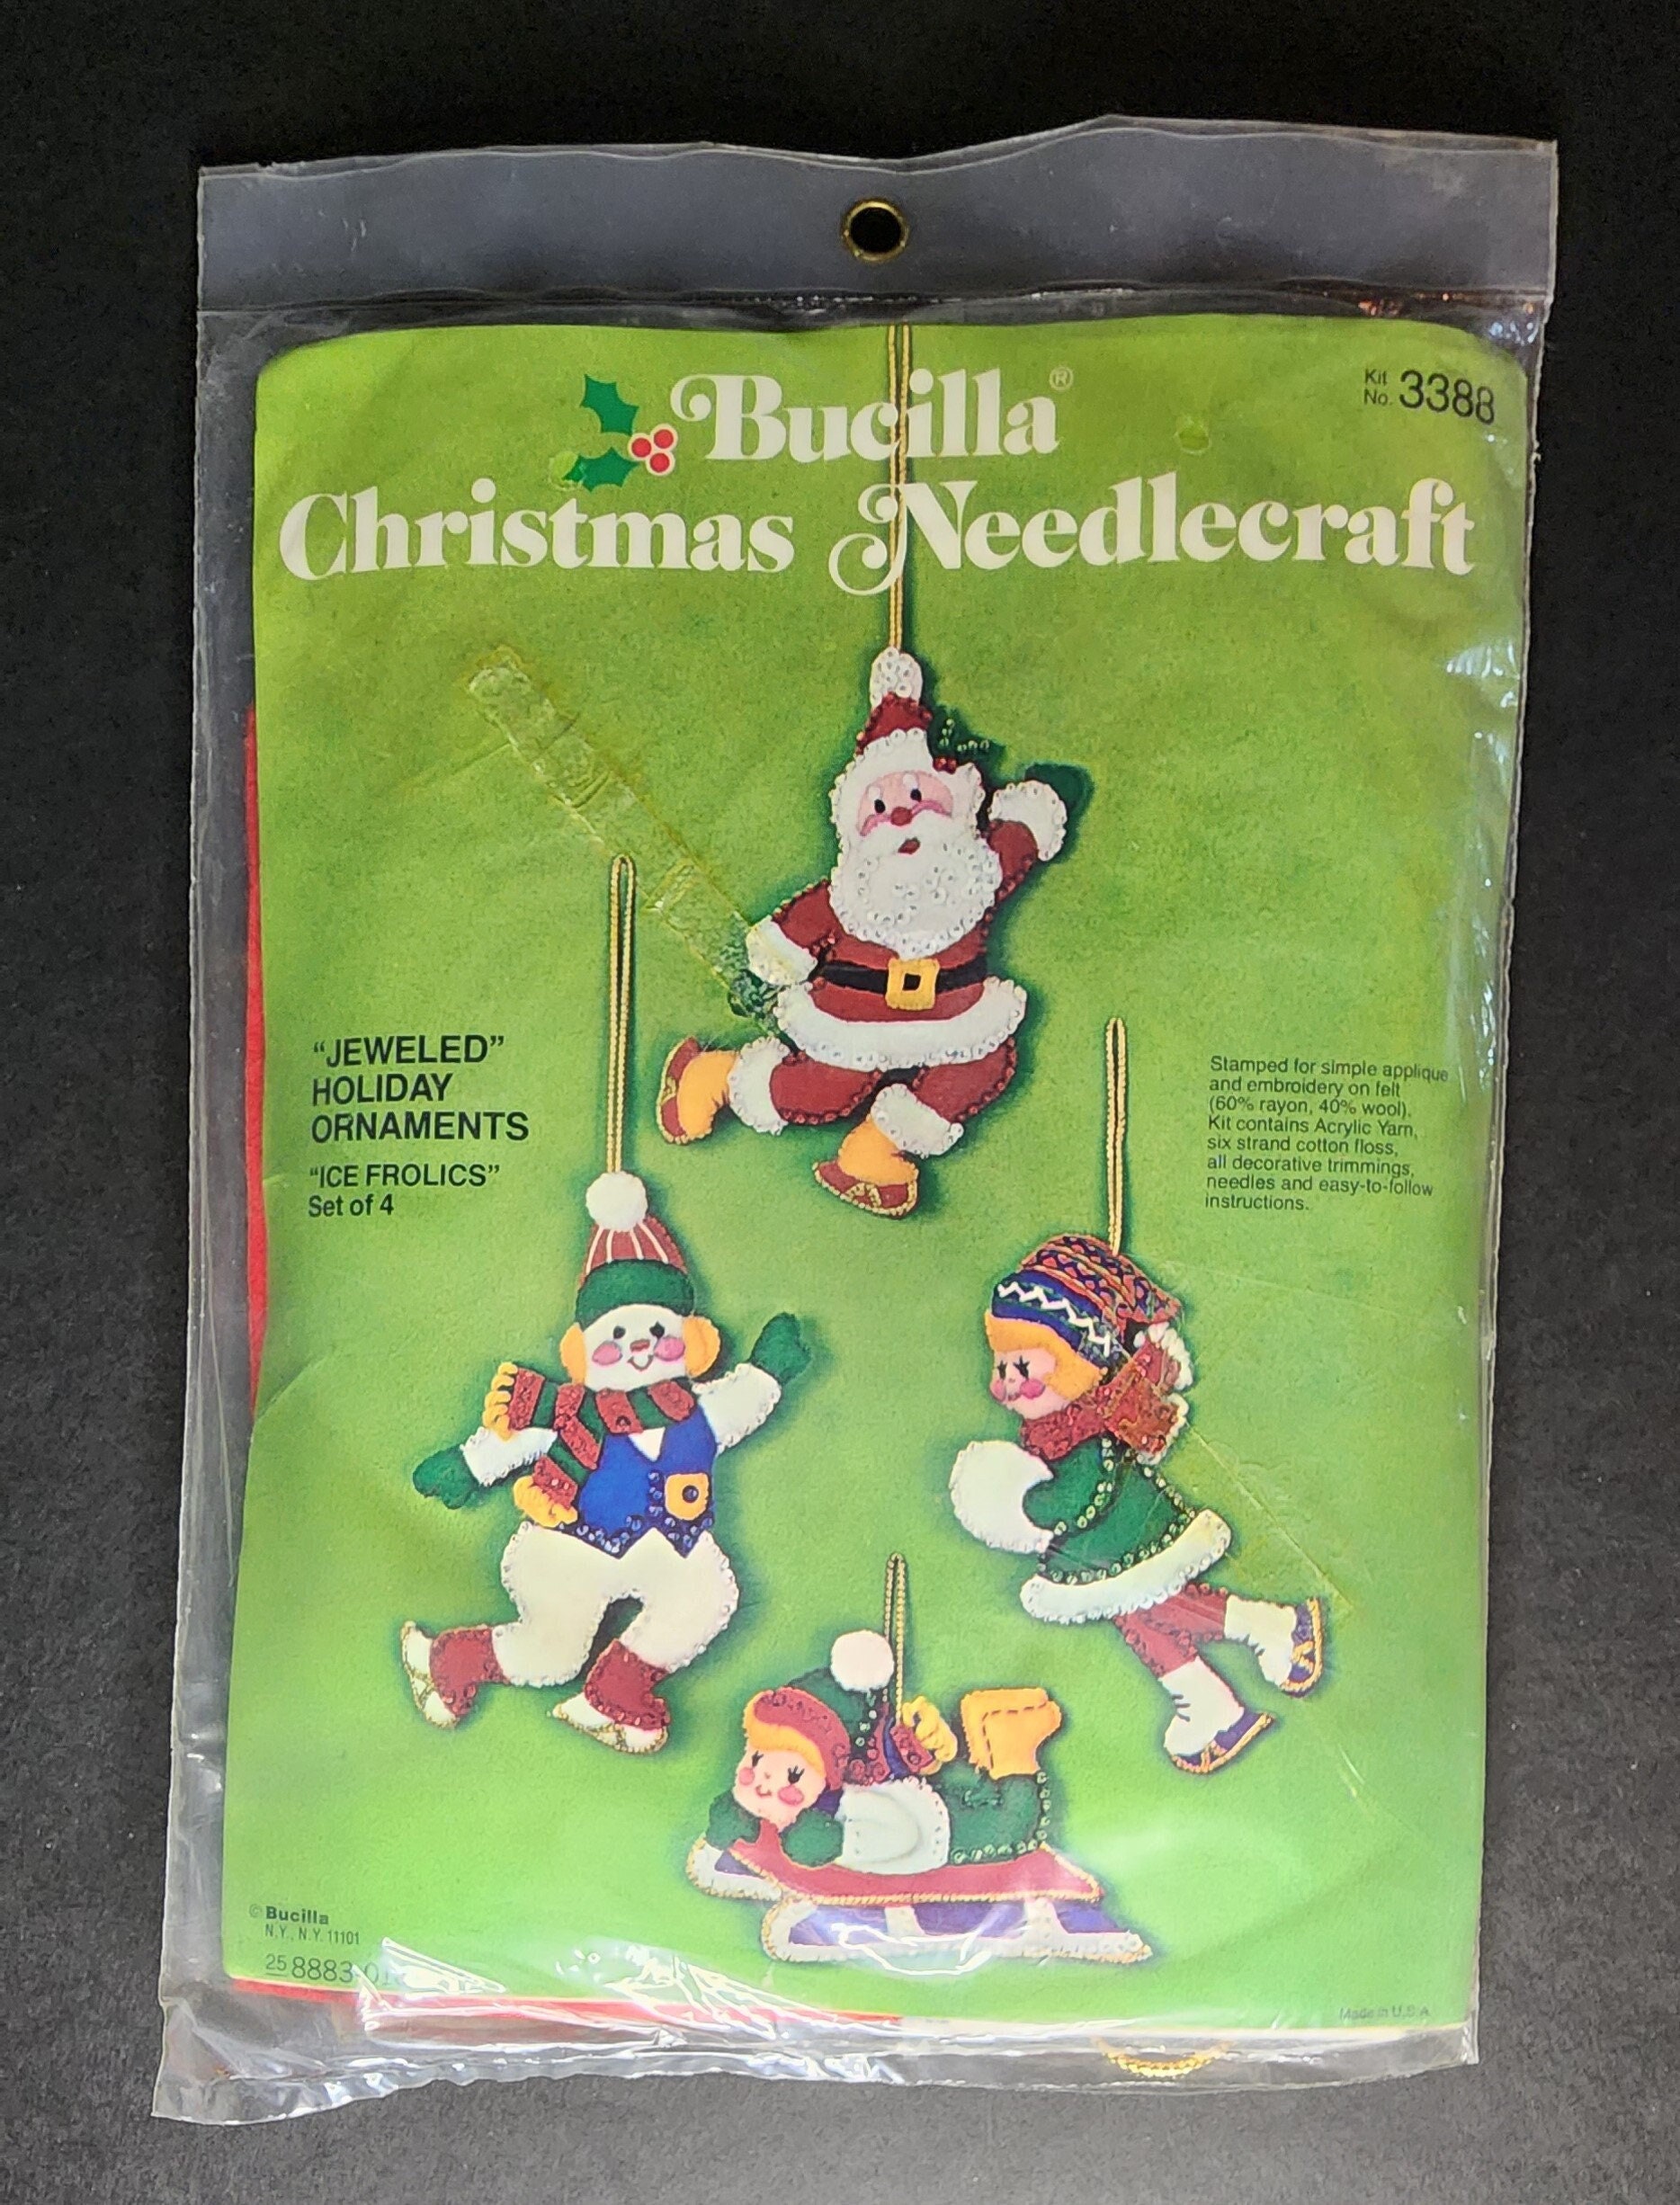 Plaid Crafts - Make your holidays magical with the Bucilla A Christmas  Skate Felt Stocking Kit. This unique Christmas stocking features an elegant  ice skater on a frozen pond. Bucilla kits come